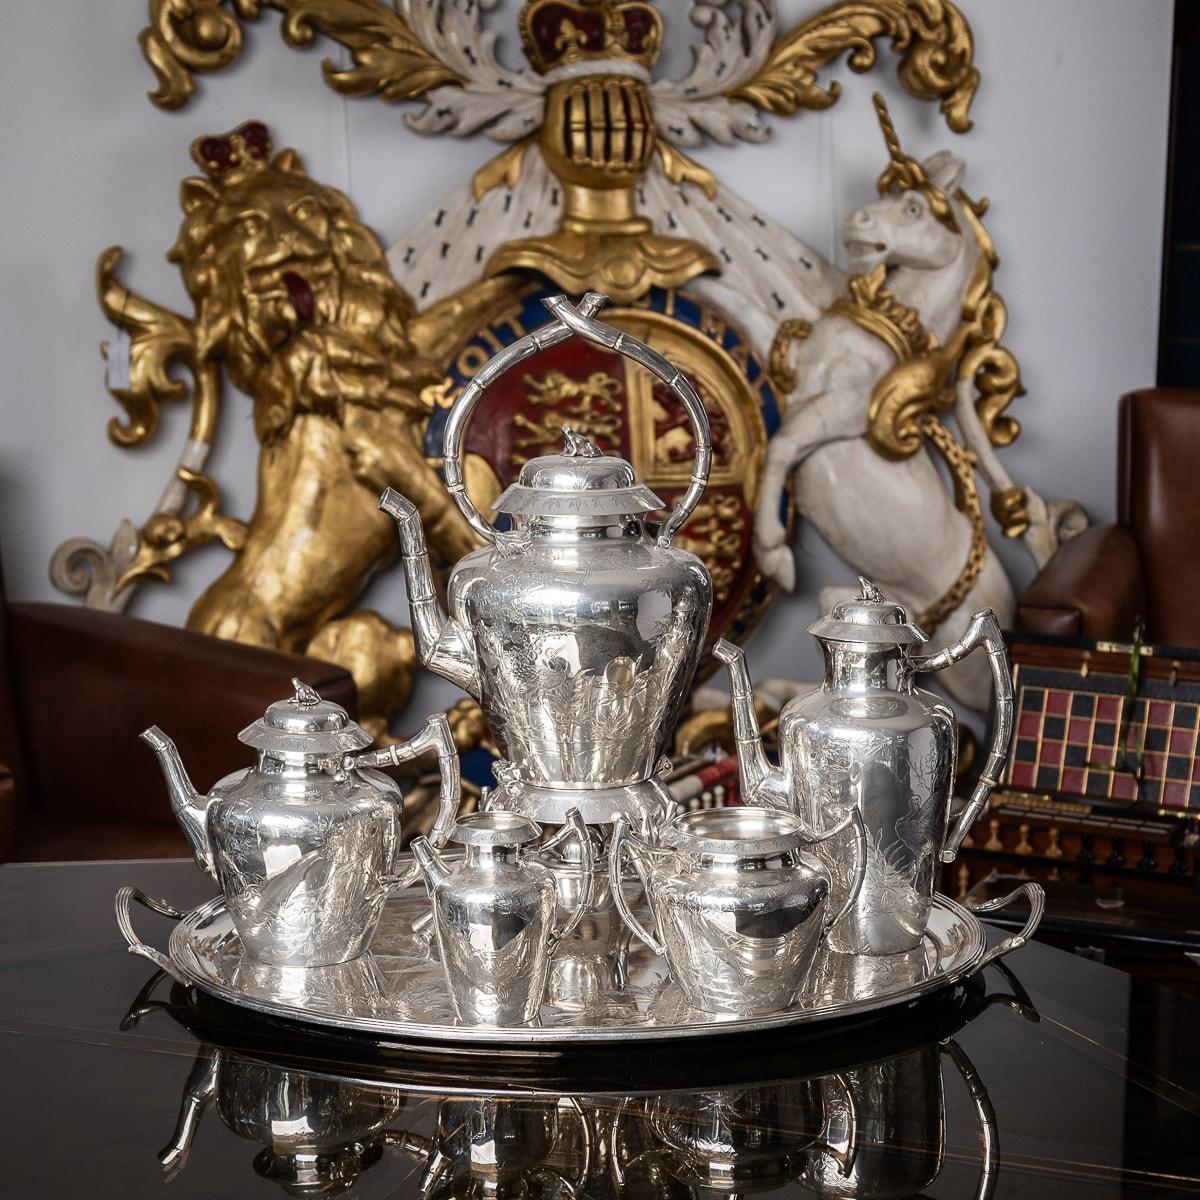 Antique 19th century Victorian Aesthetic movement solid silver tea and coffee service, comprising of a hot water kettle, coffee pot, teapot, sugar bowl, cream jug and tray. The set is extremely unusual and rare in design and finely crafted, engraved